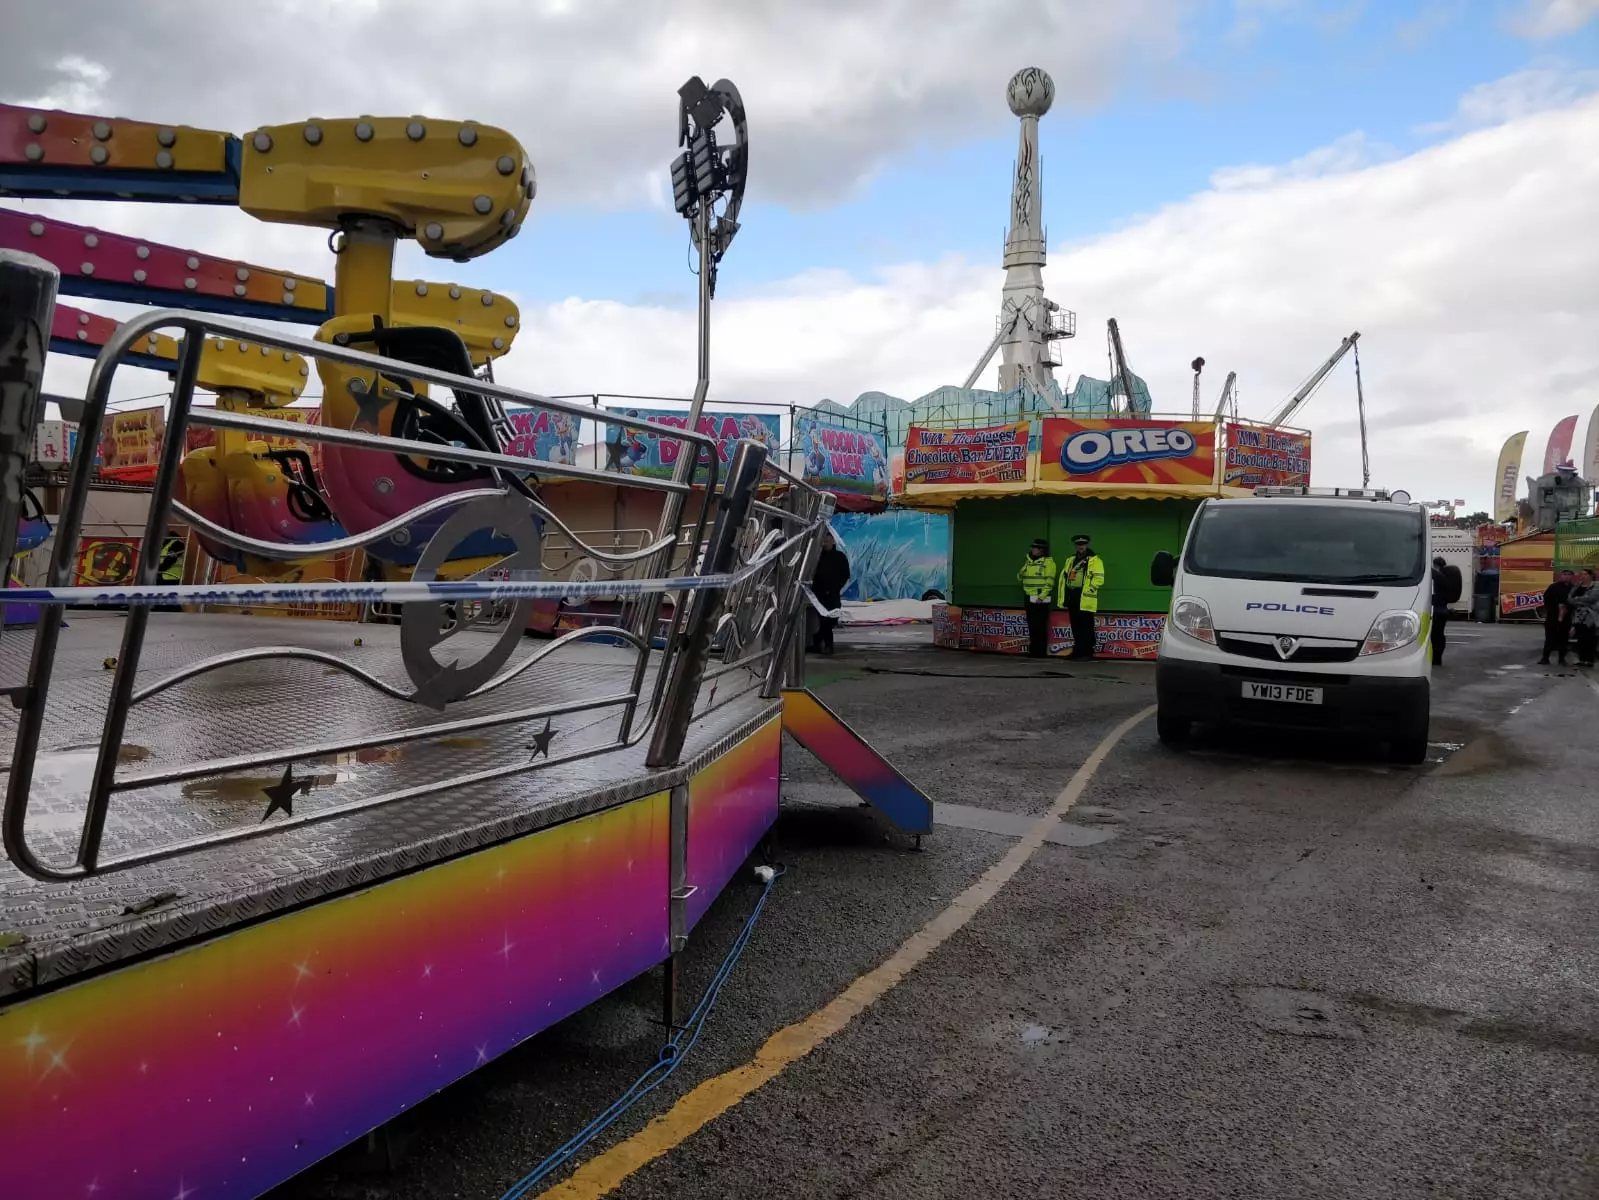 The fairground in Hull.